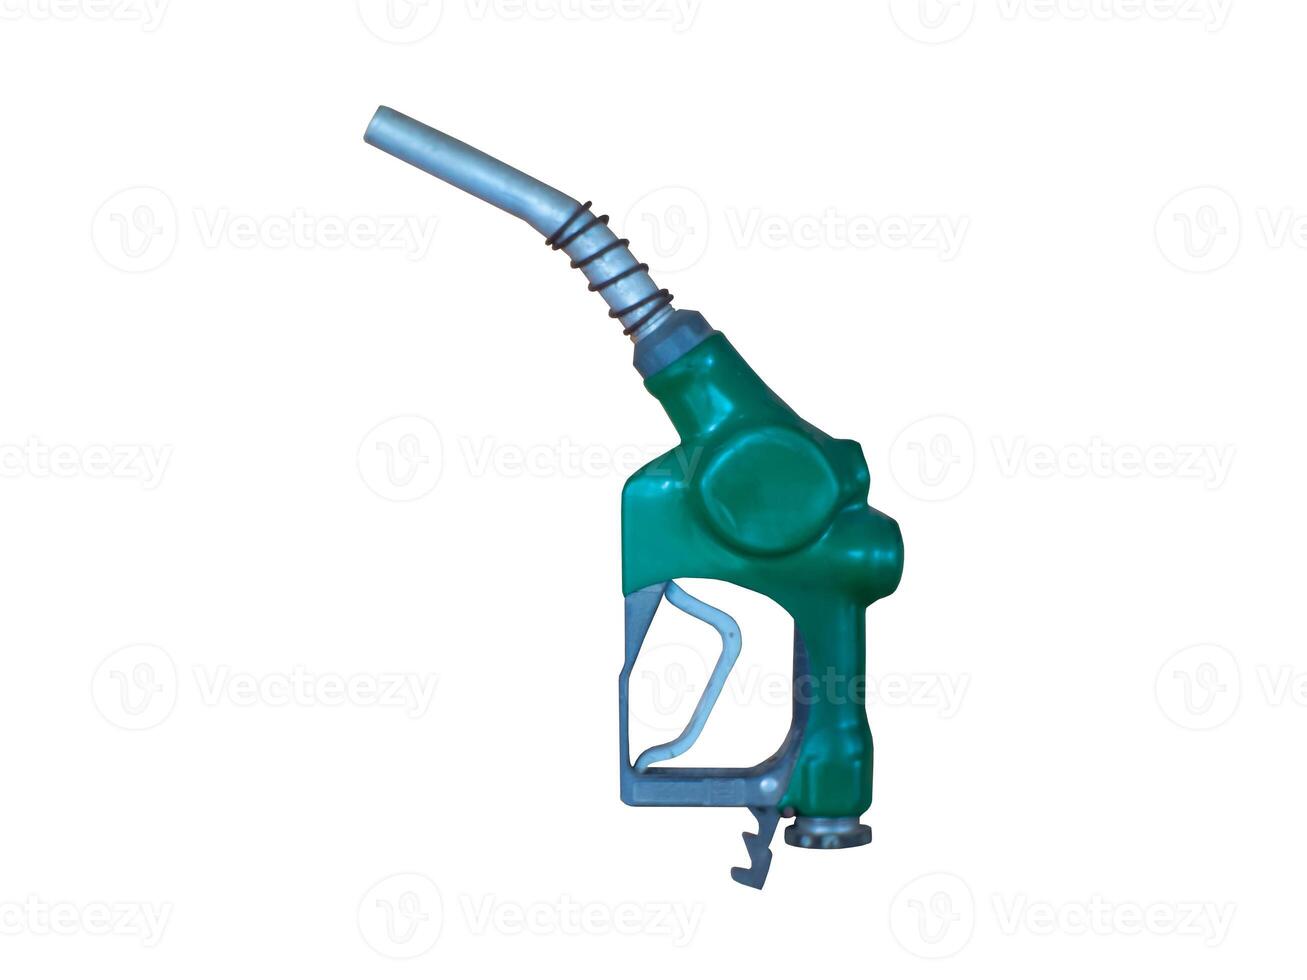 Isolated Gas Pump Nozzle on White Background with Fuel Pump Technology photo